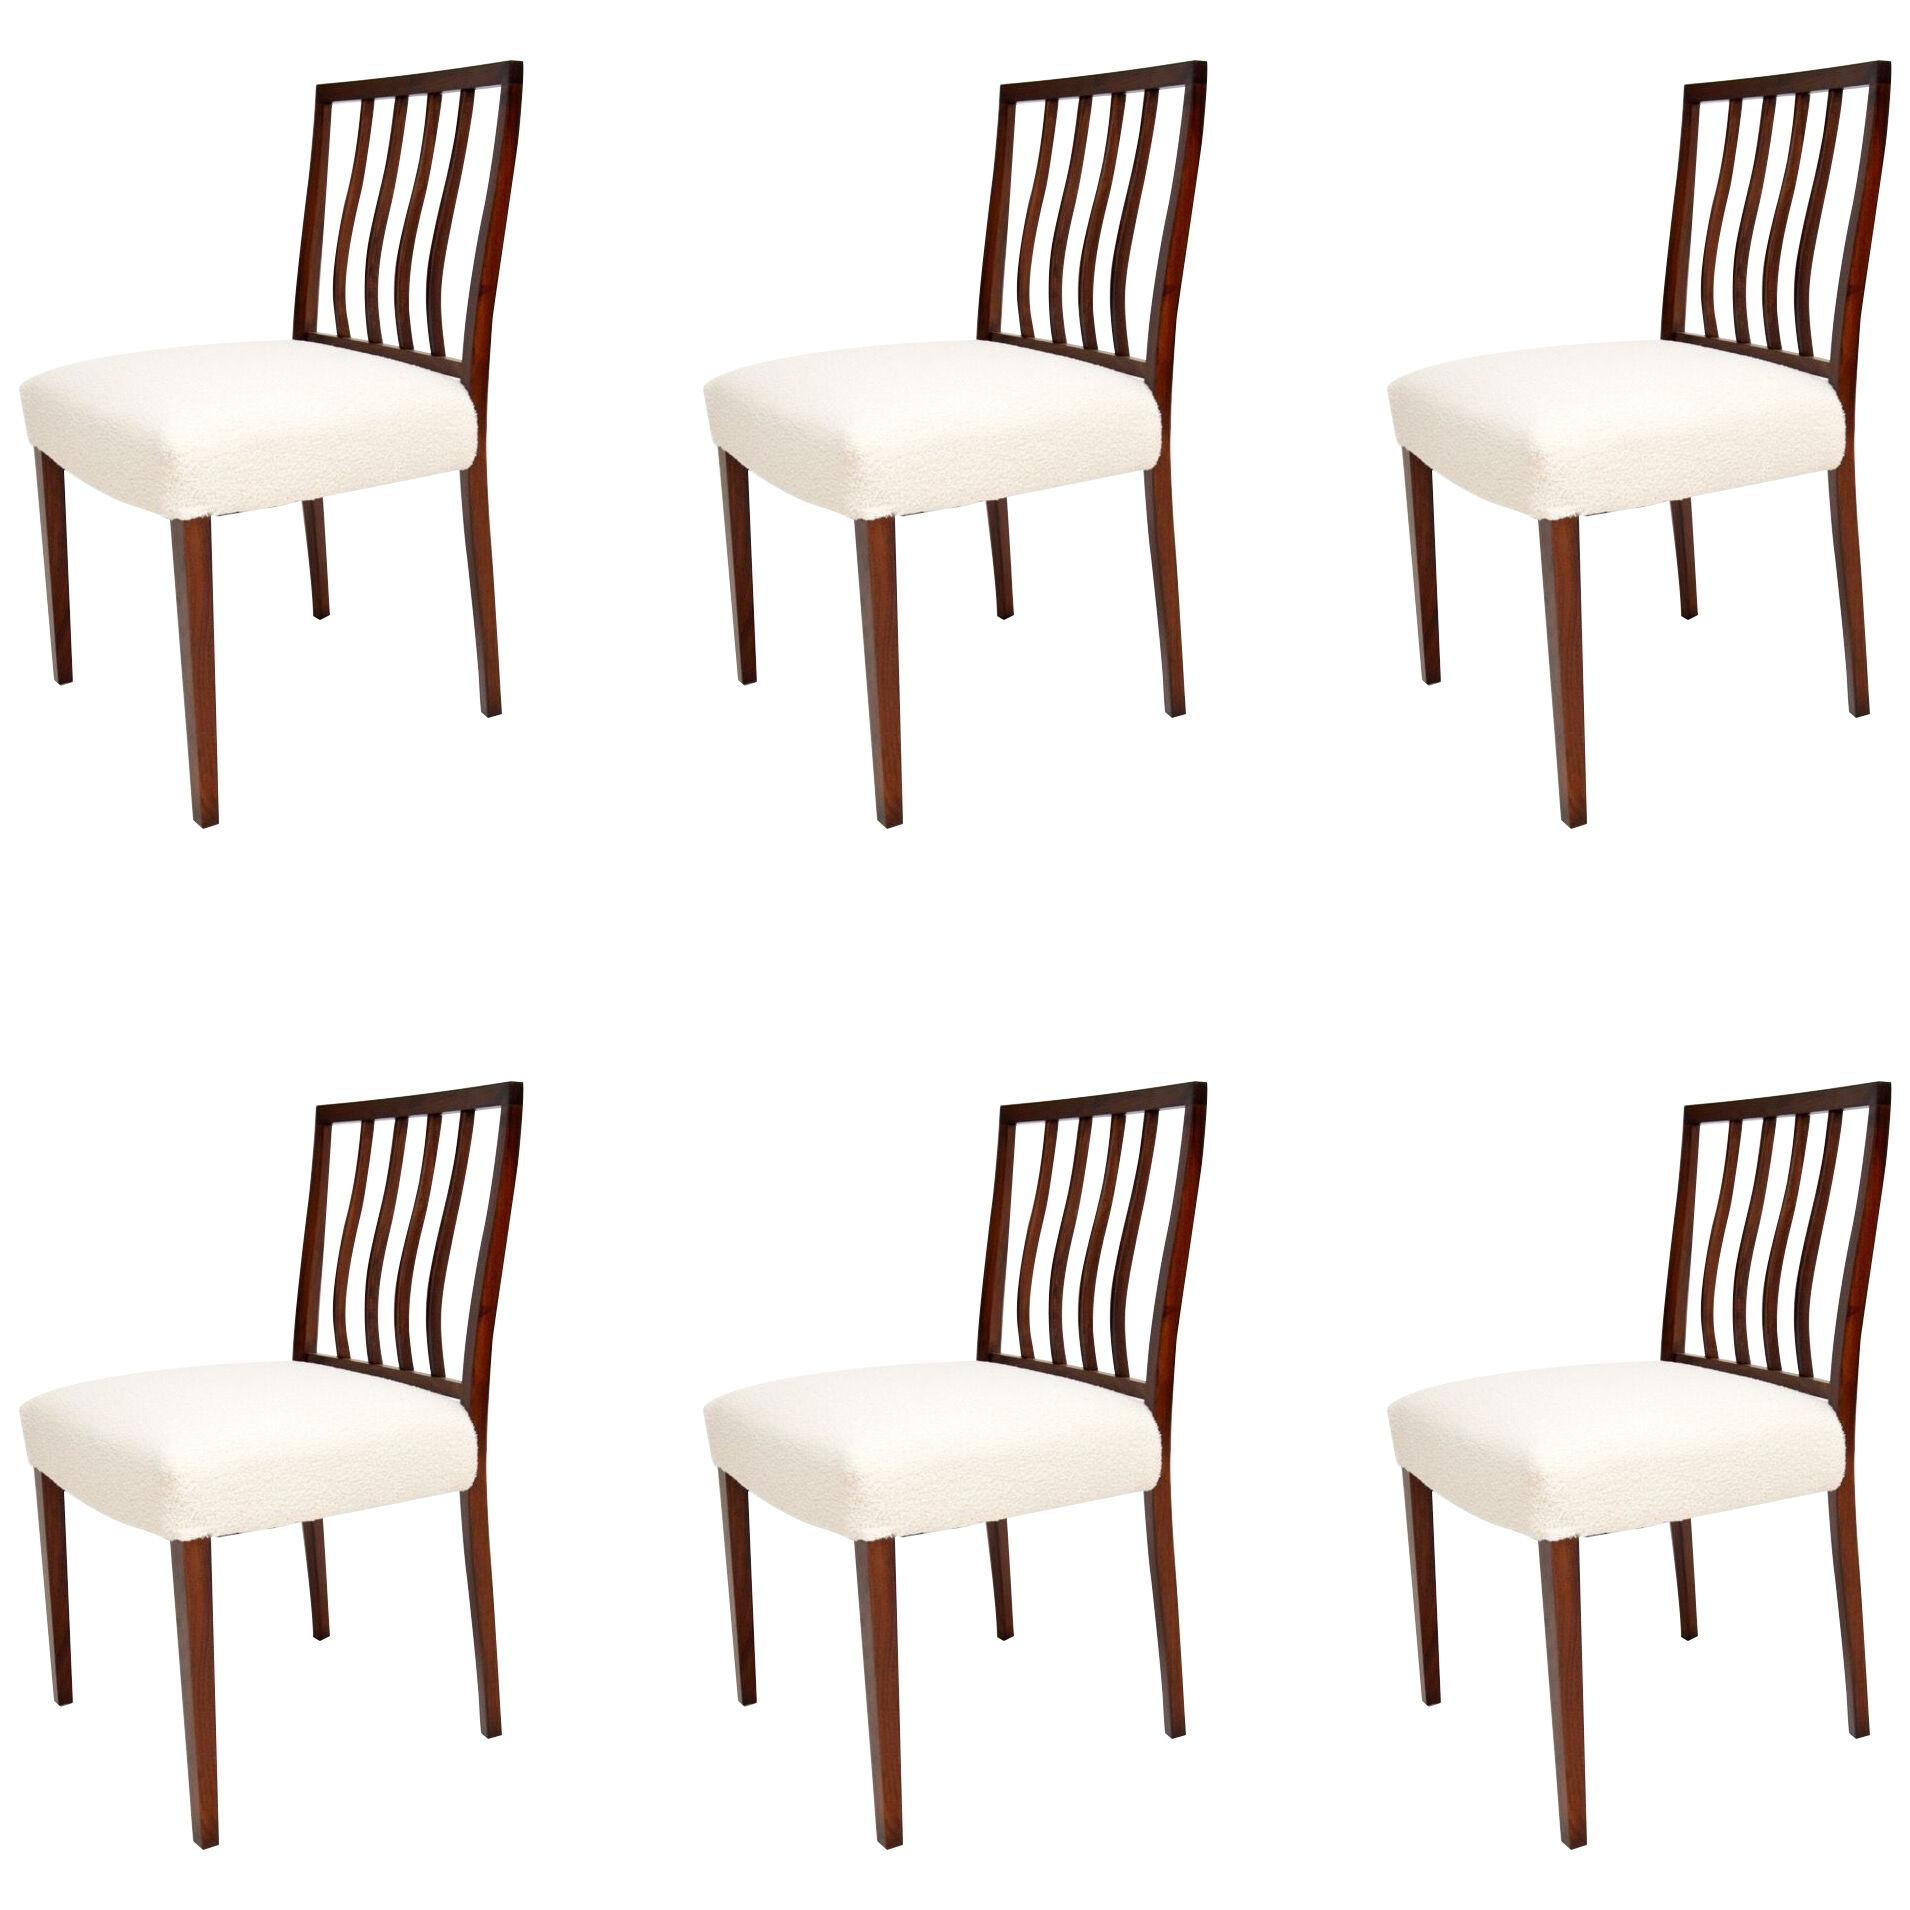 1960's Set of 6 Rosewood Dining Chairs by Robert Heritage for Archie Shine